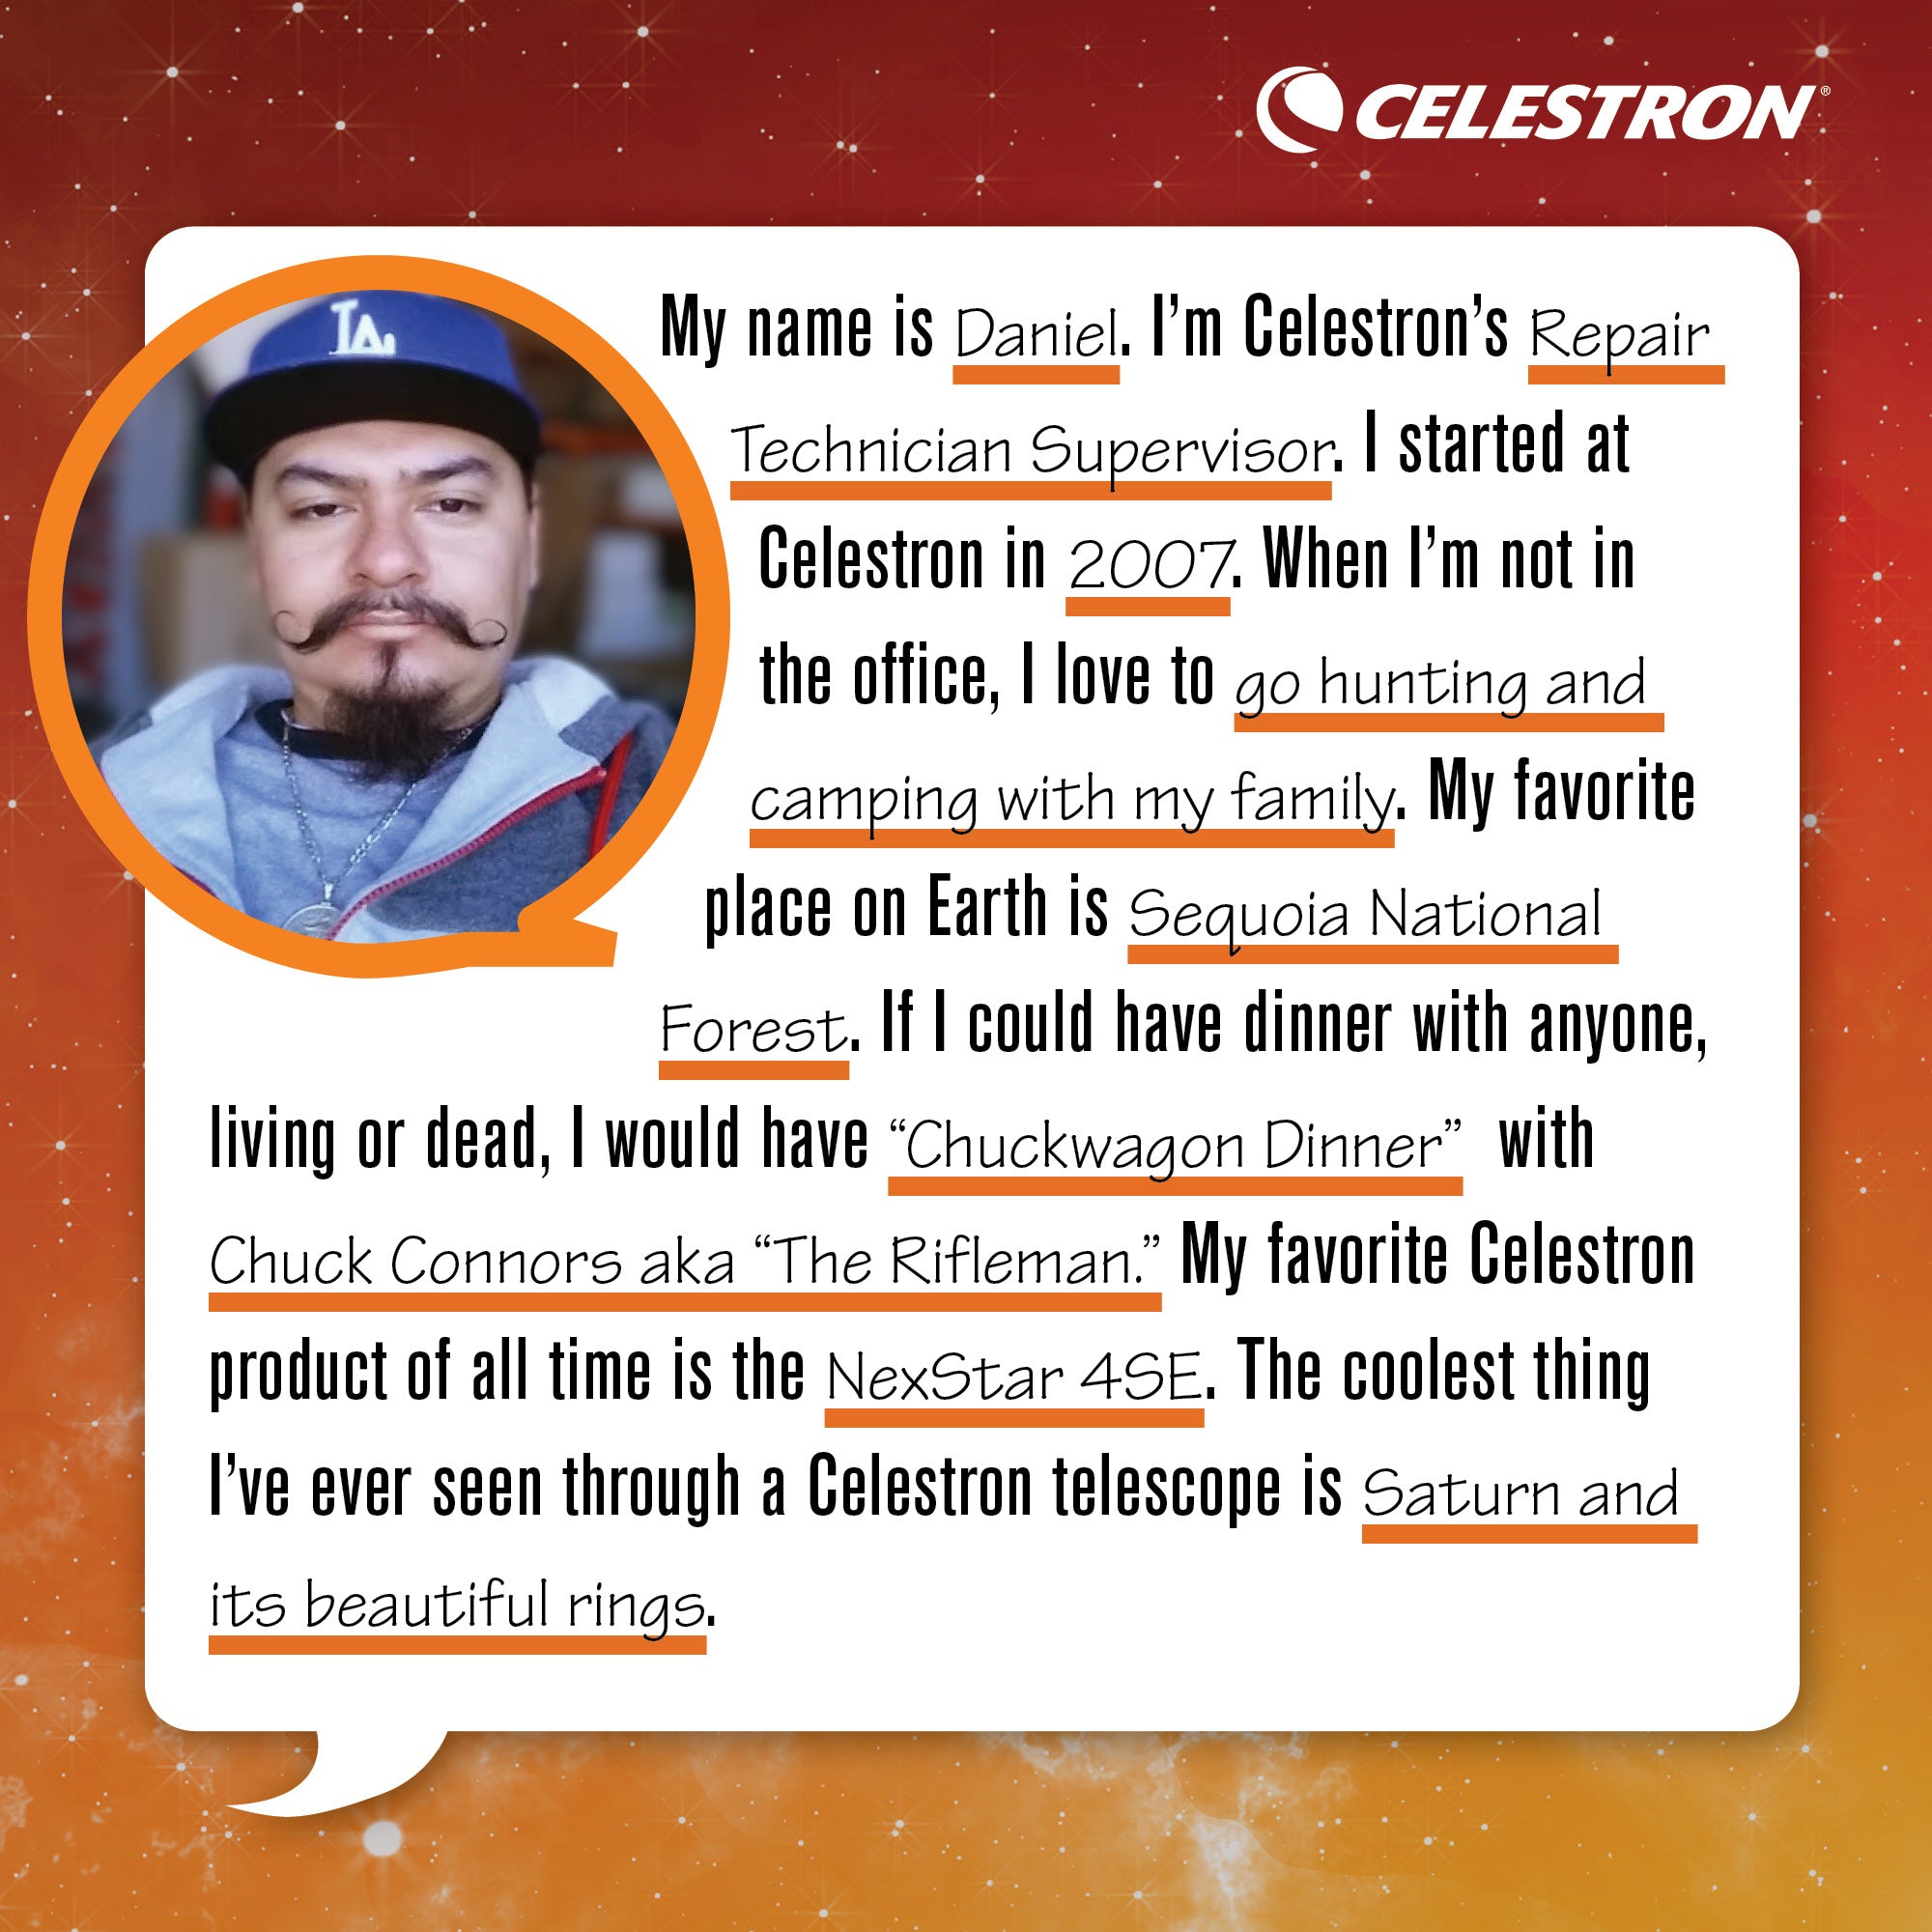 My name is Daniel. I'm Celestron's Repair Technician. I started at Celestron in 2007. When I'm not in the office, I love to go hunting and camping with my family.  My favorite place on Earth is Sequoia National Forest. If I could have dinner with anyone, living or dead, I would have Chuckwagon Dinner with Chuck Connor aka the Rifeman. My favorite Celestron product of all time is the NexStar 4SE. The coolest thing I’ve ever seen through a Celestron telescope is Saturn and its beautiful rings.